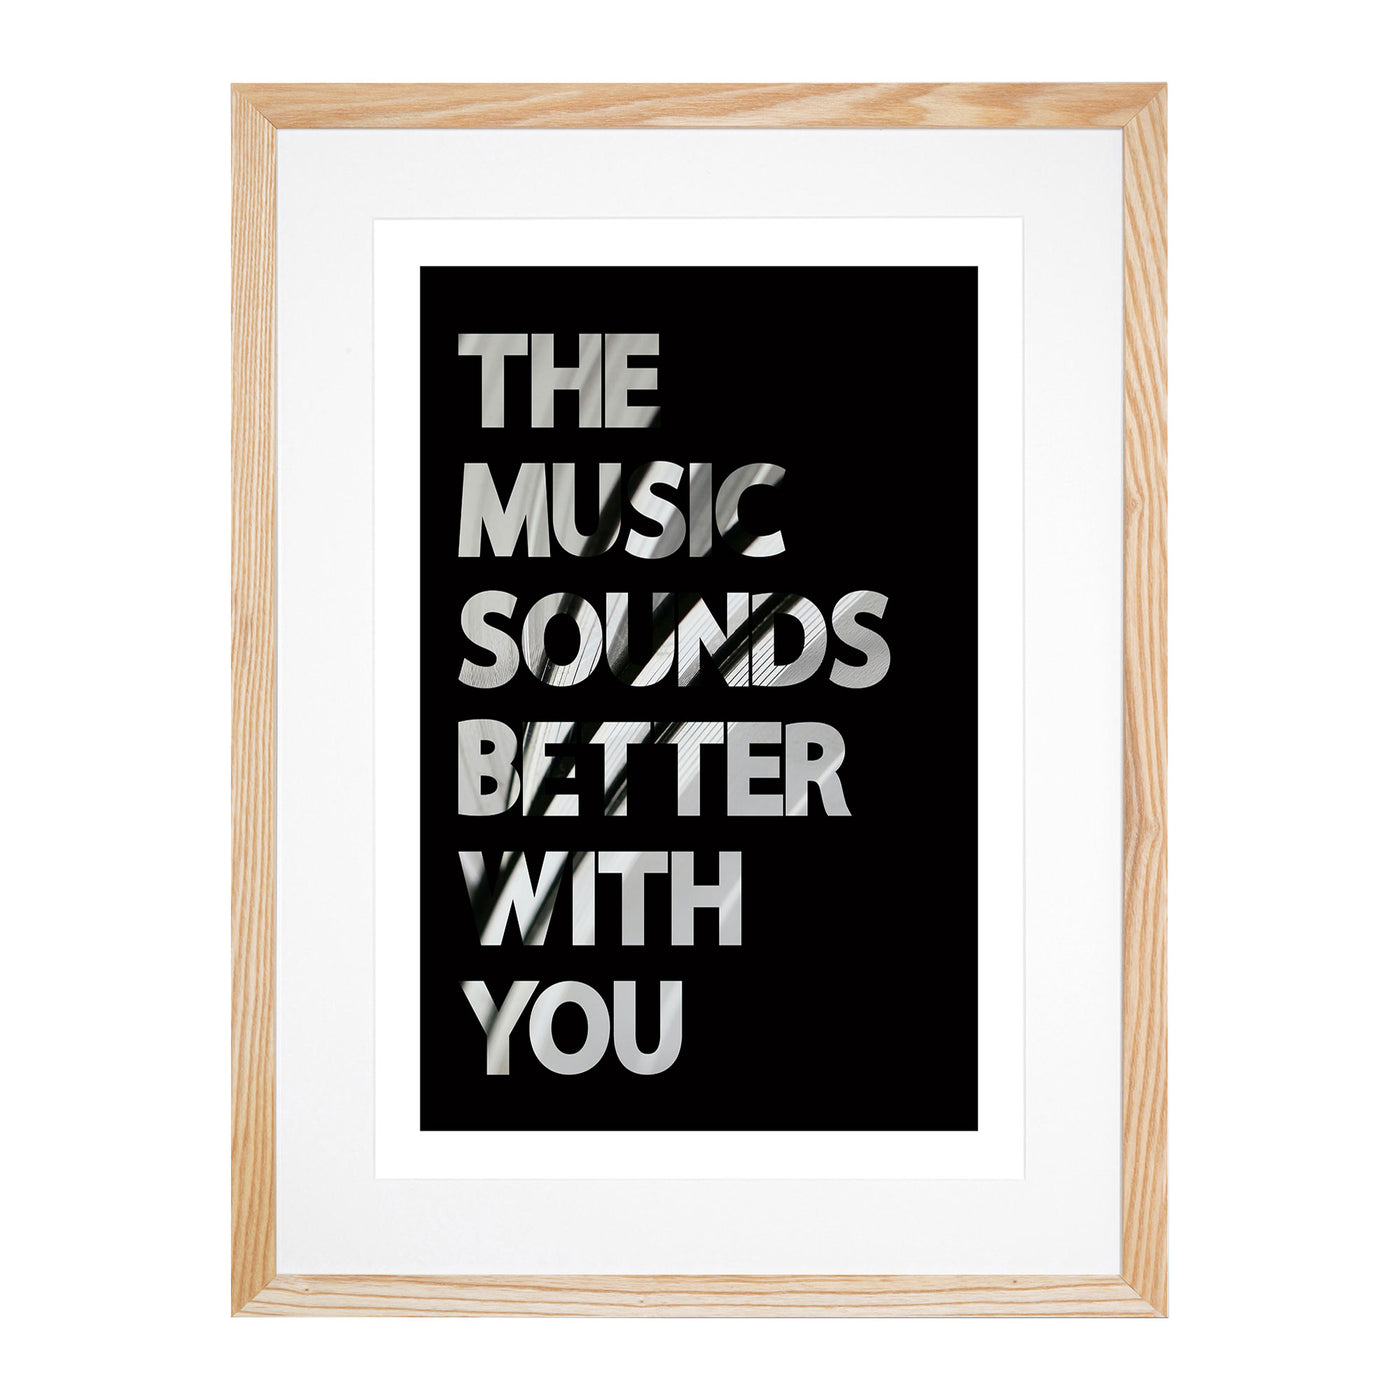 The Music Sounds Better with You